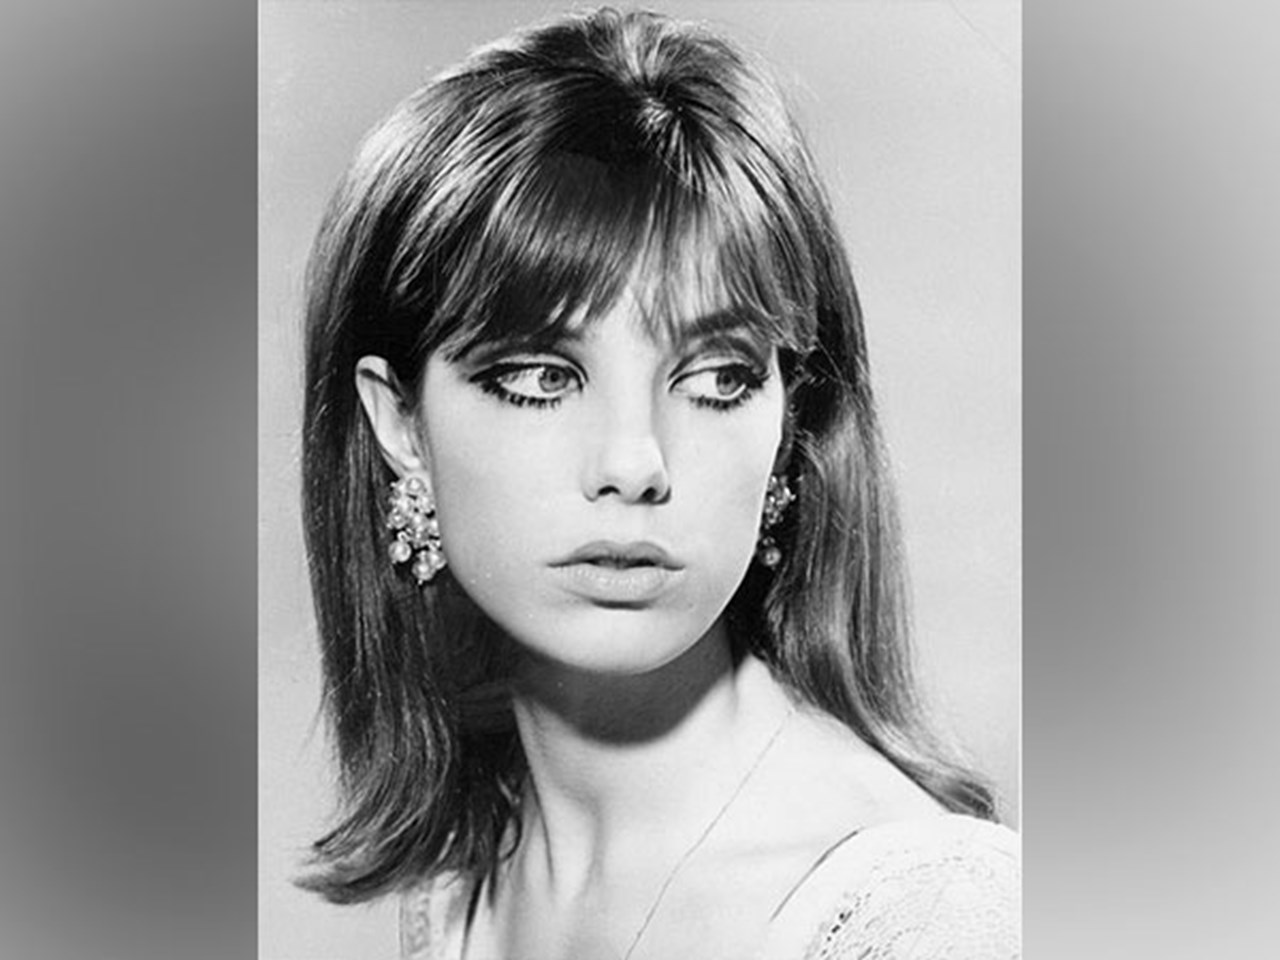 Jane Birkin, Singer, Actress and Fashion Icon, Dead at 76